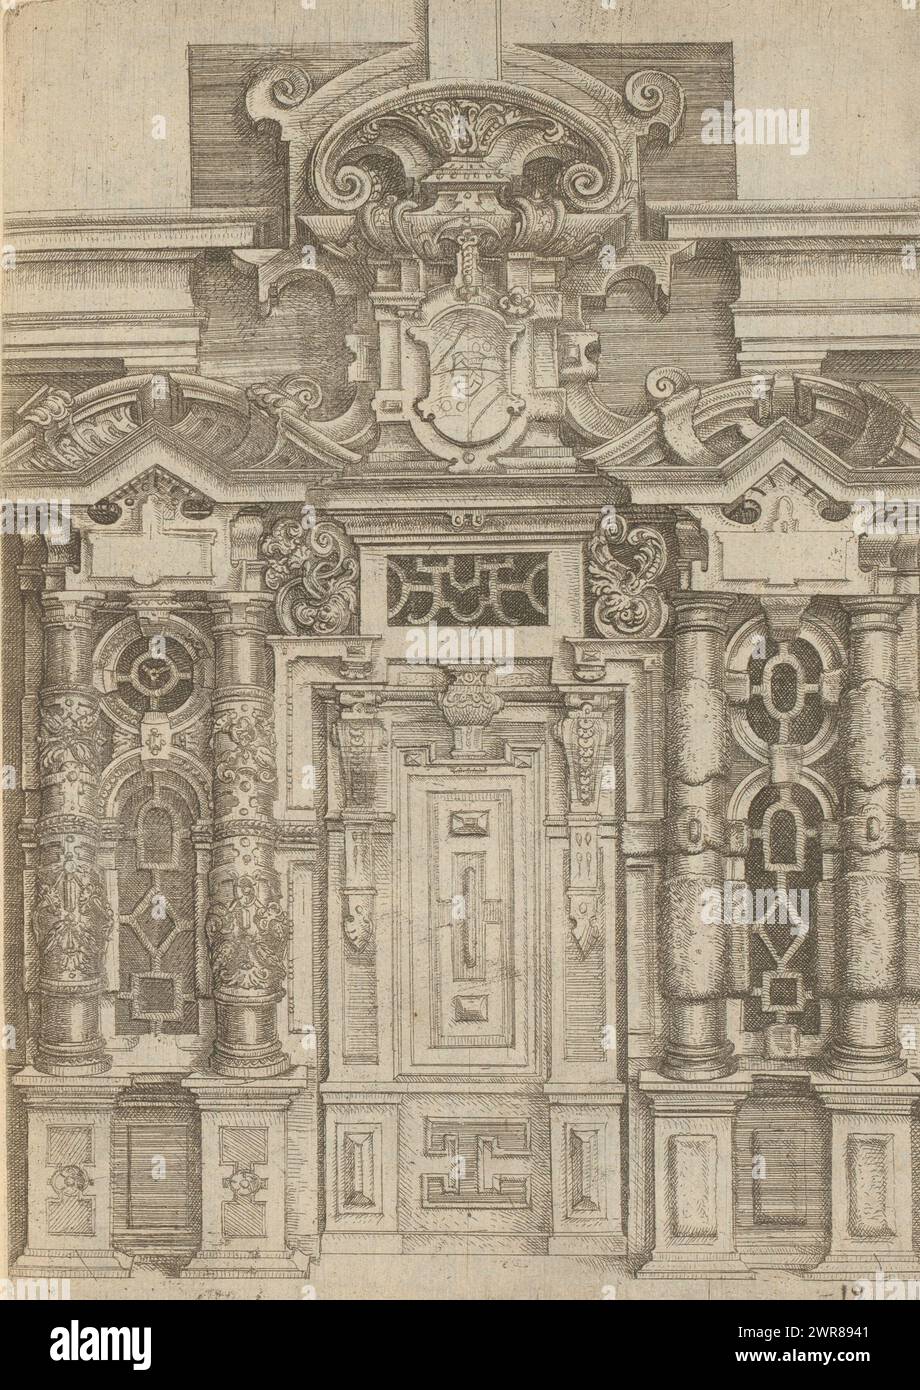 Door and windows with decorated columns and pediments, Architectura (series title), Numbered: 19. Print is part of a book., print maker: Wendel Dietterlin (I), publisher: Bernhard Jobin, Straatsburg (Frankrijk), 1593 - 1595, paper, etching, height 252 mm × width 185 mm Stock Photo